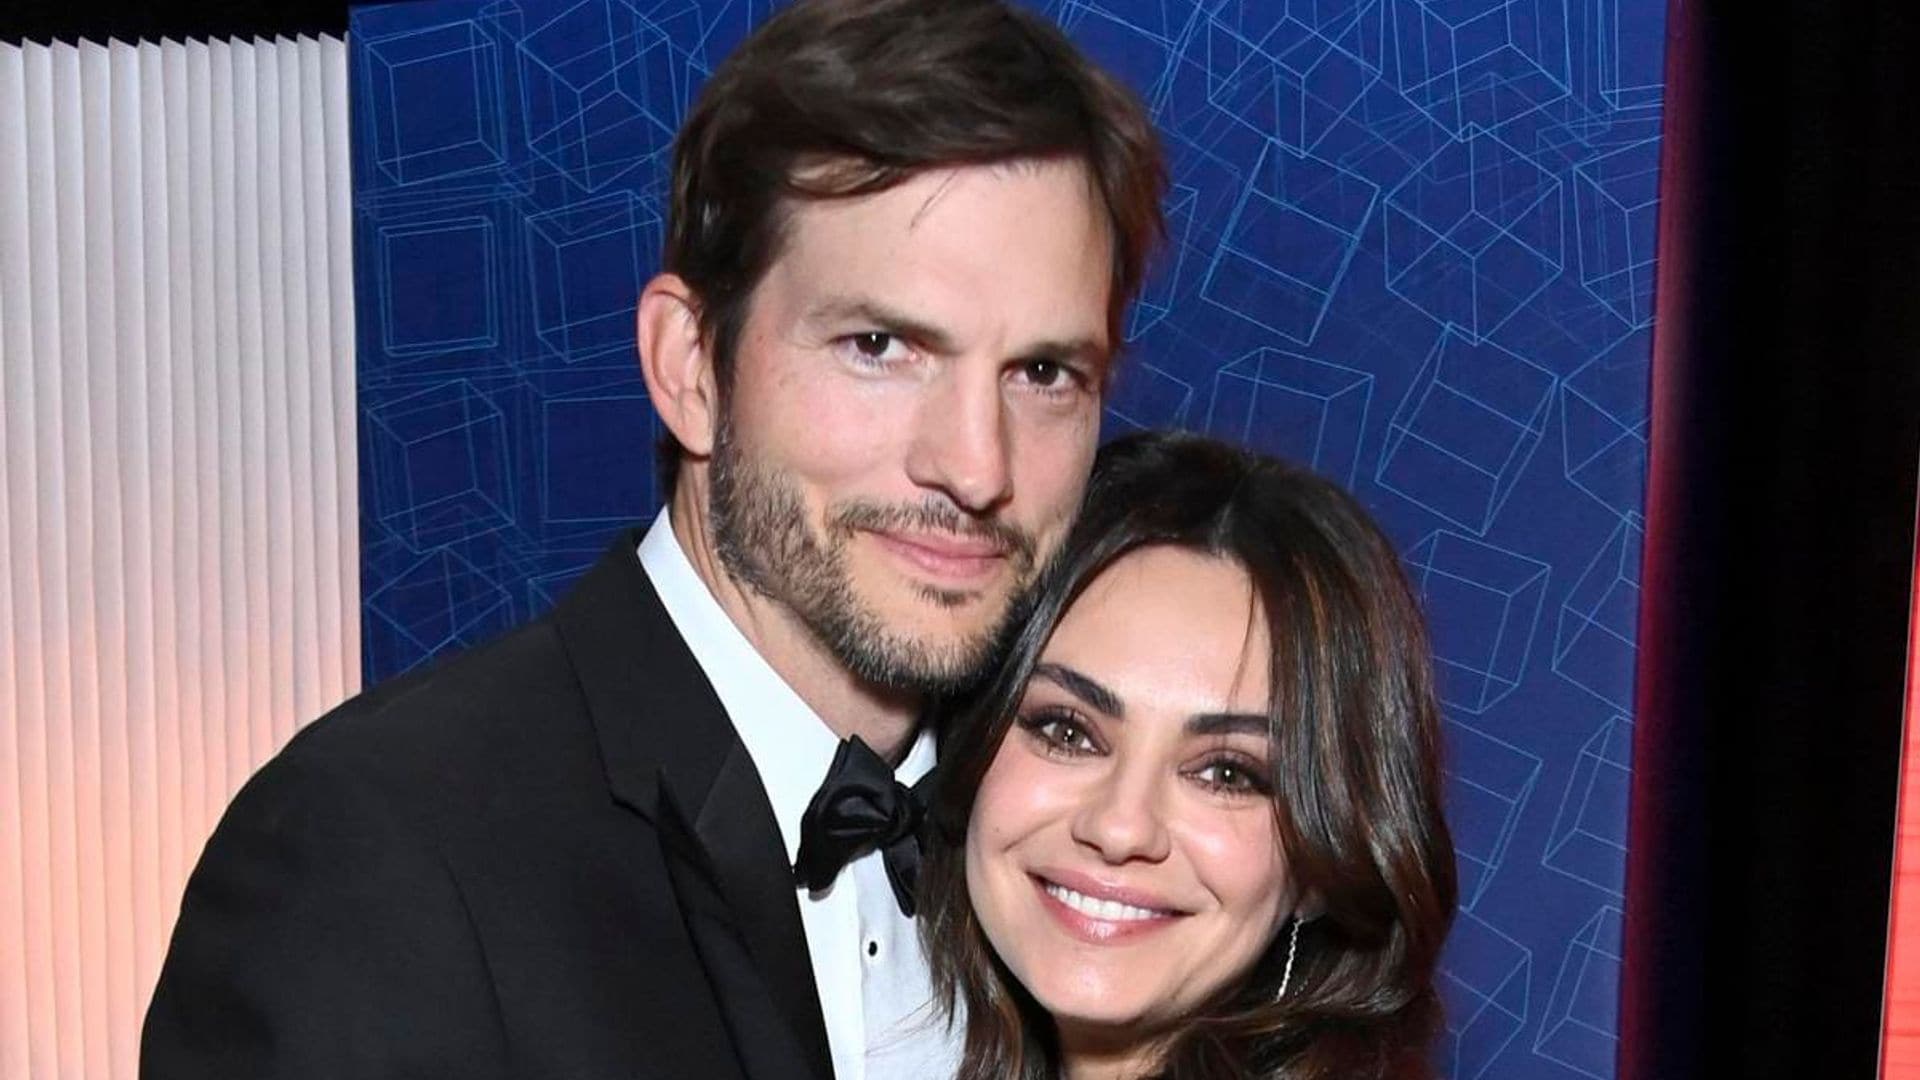 Ashton Kutcher’s ‘dumb’ idea: list his and Mila Kunis’ guest house on Airbnb